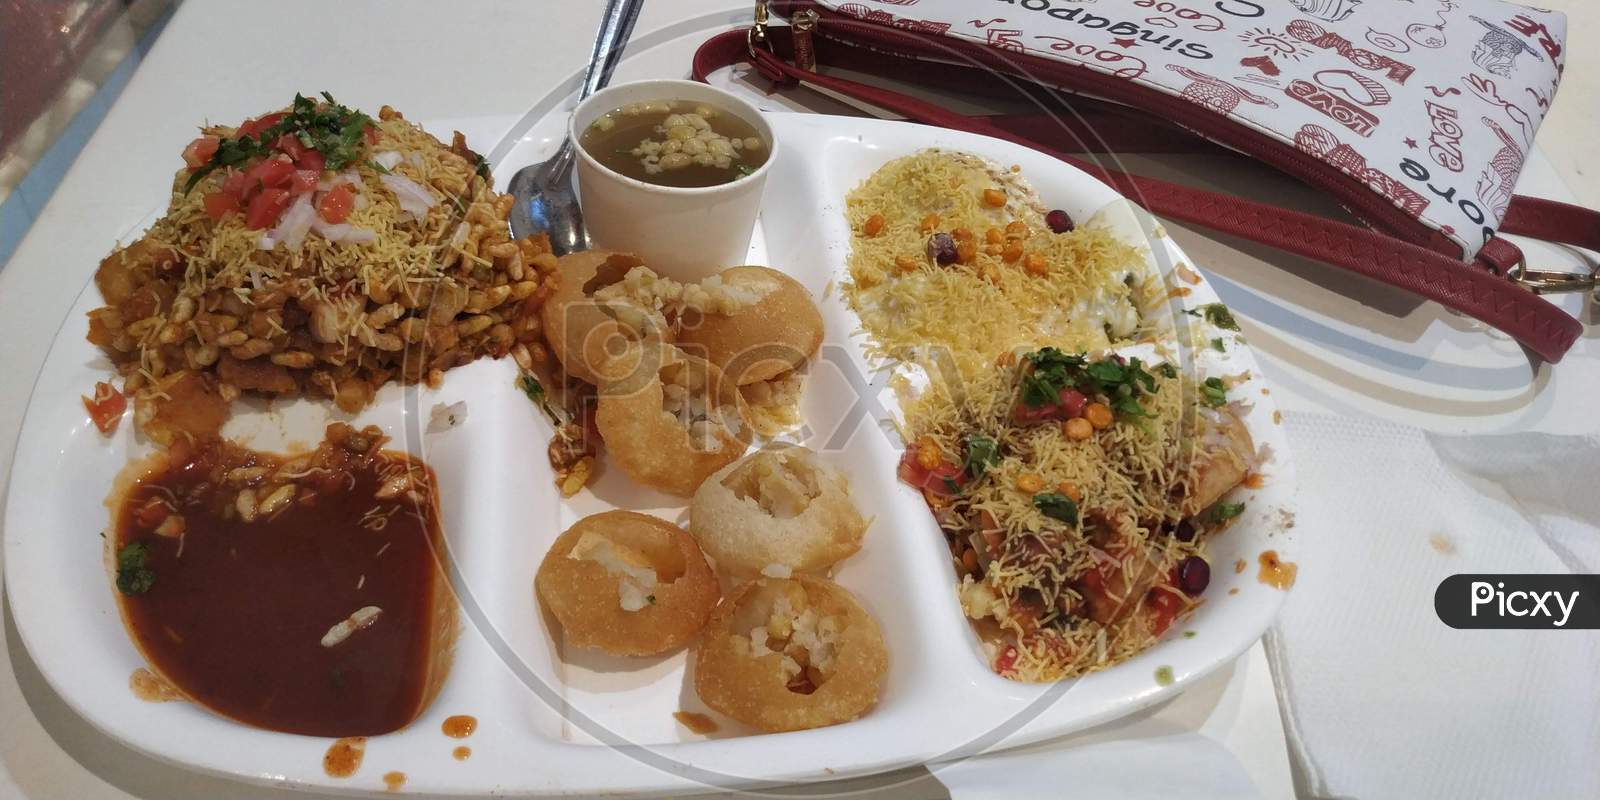 Famous Indian Street Food With Bhel , Panipuri And Papdi Chat With Sweet And Spicy Chutney With Onion And Aloo Or Potato Masala On White Plate